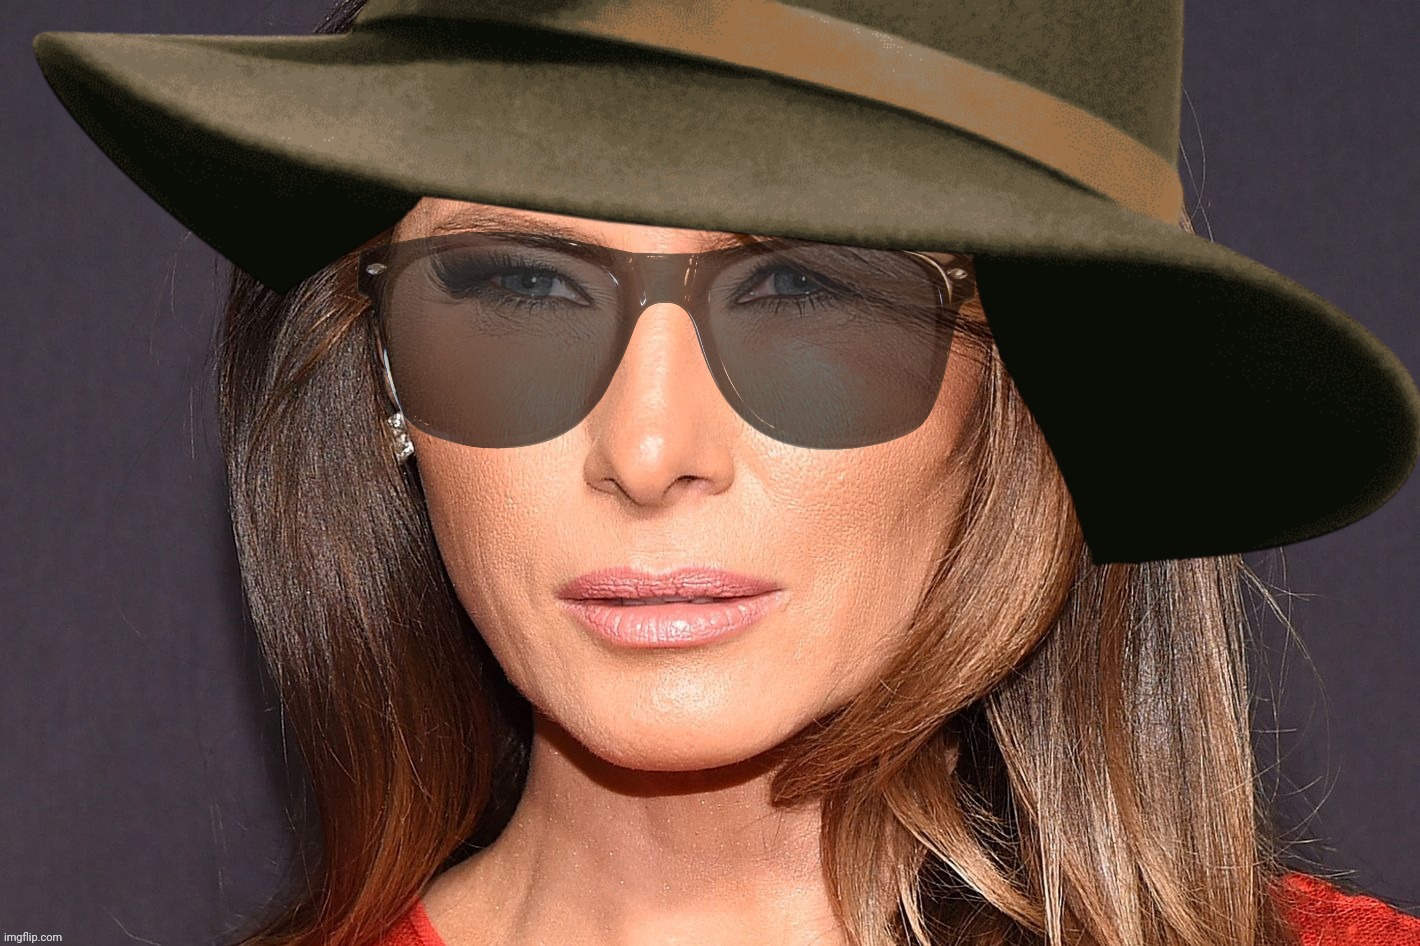 Melania Trump, incognito, but not divorced. Yet. | image tagged in melania trump,trump,incognito,melania,porn again christian | made w/ Imgflip meme maker